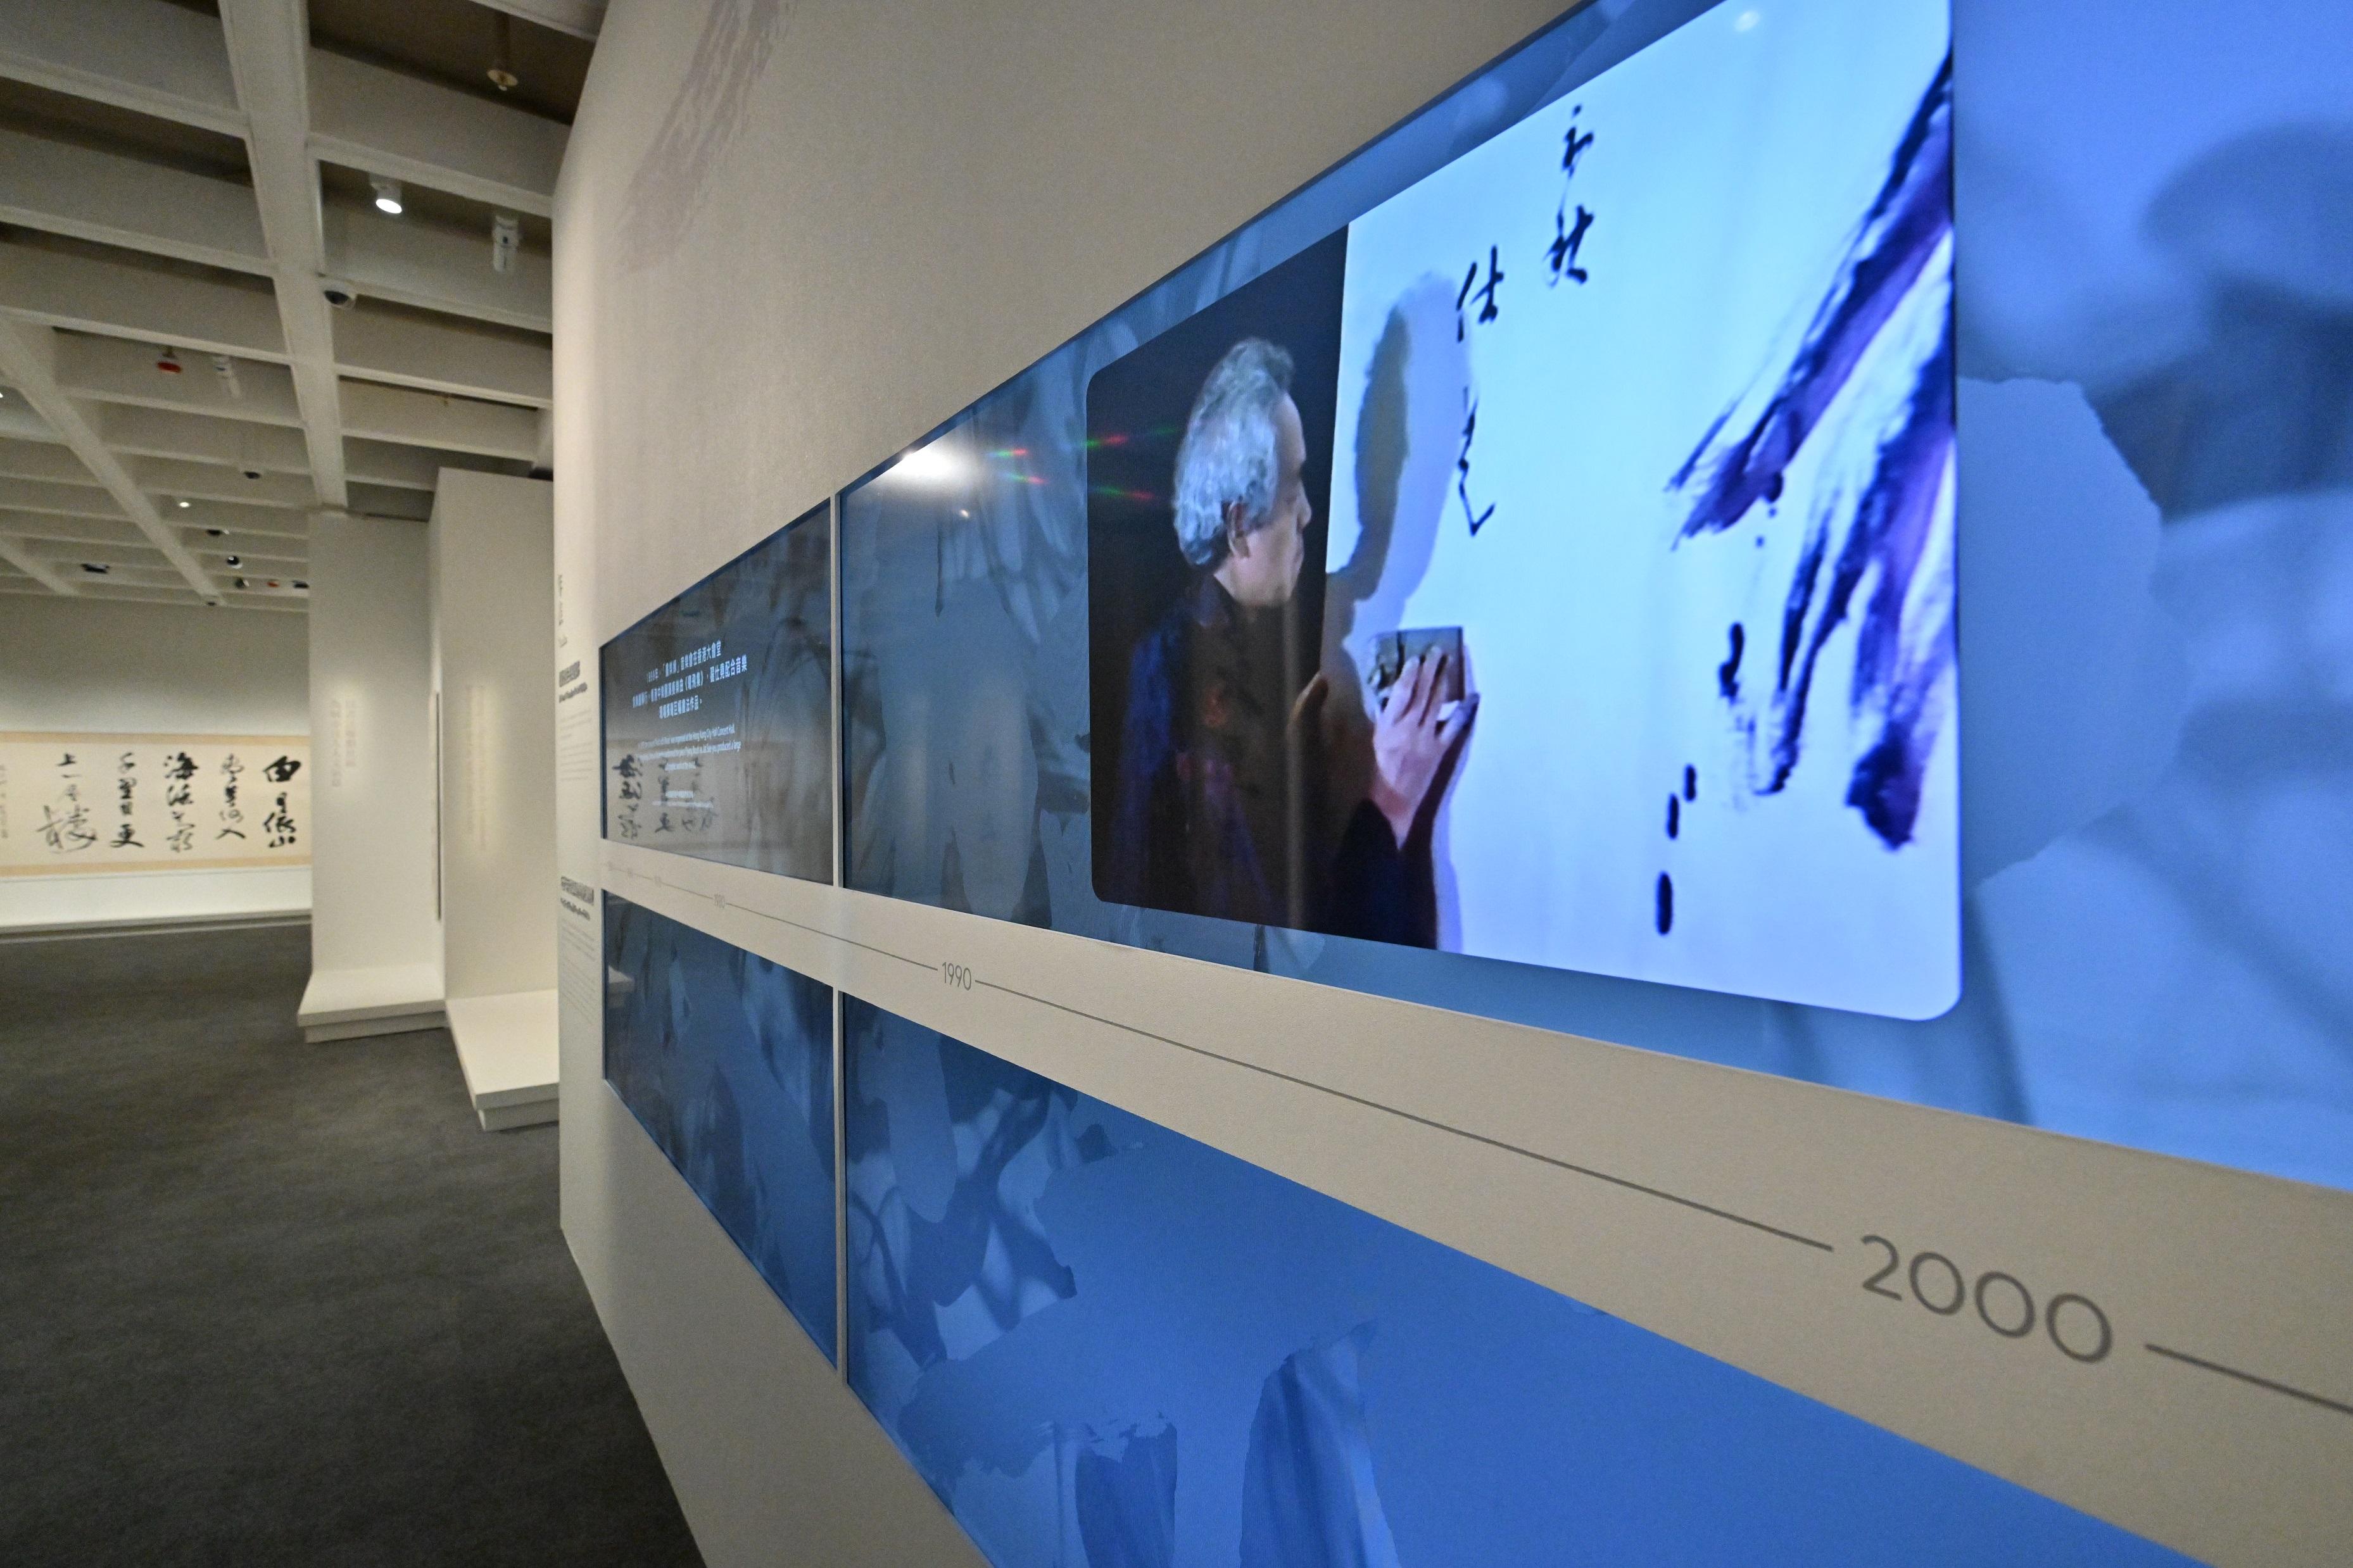 The opening ceremony of the "Boundless Universe: Calligraphy by Jat See-yeu" exhibition and donation ceremony was held today (December 7) at the Hong Kong Museum of Art. Photo shows a dynamic timeline depicting Jat See-yeu's artistic journey and the development of Hong Kong's calligraphy groups since the 1950s.